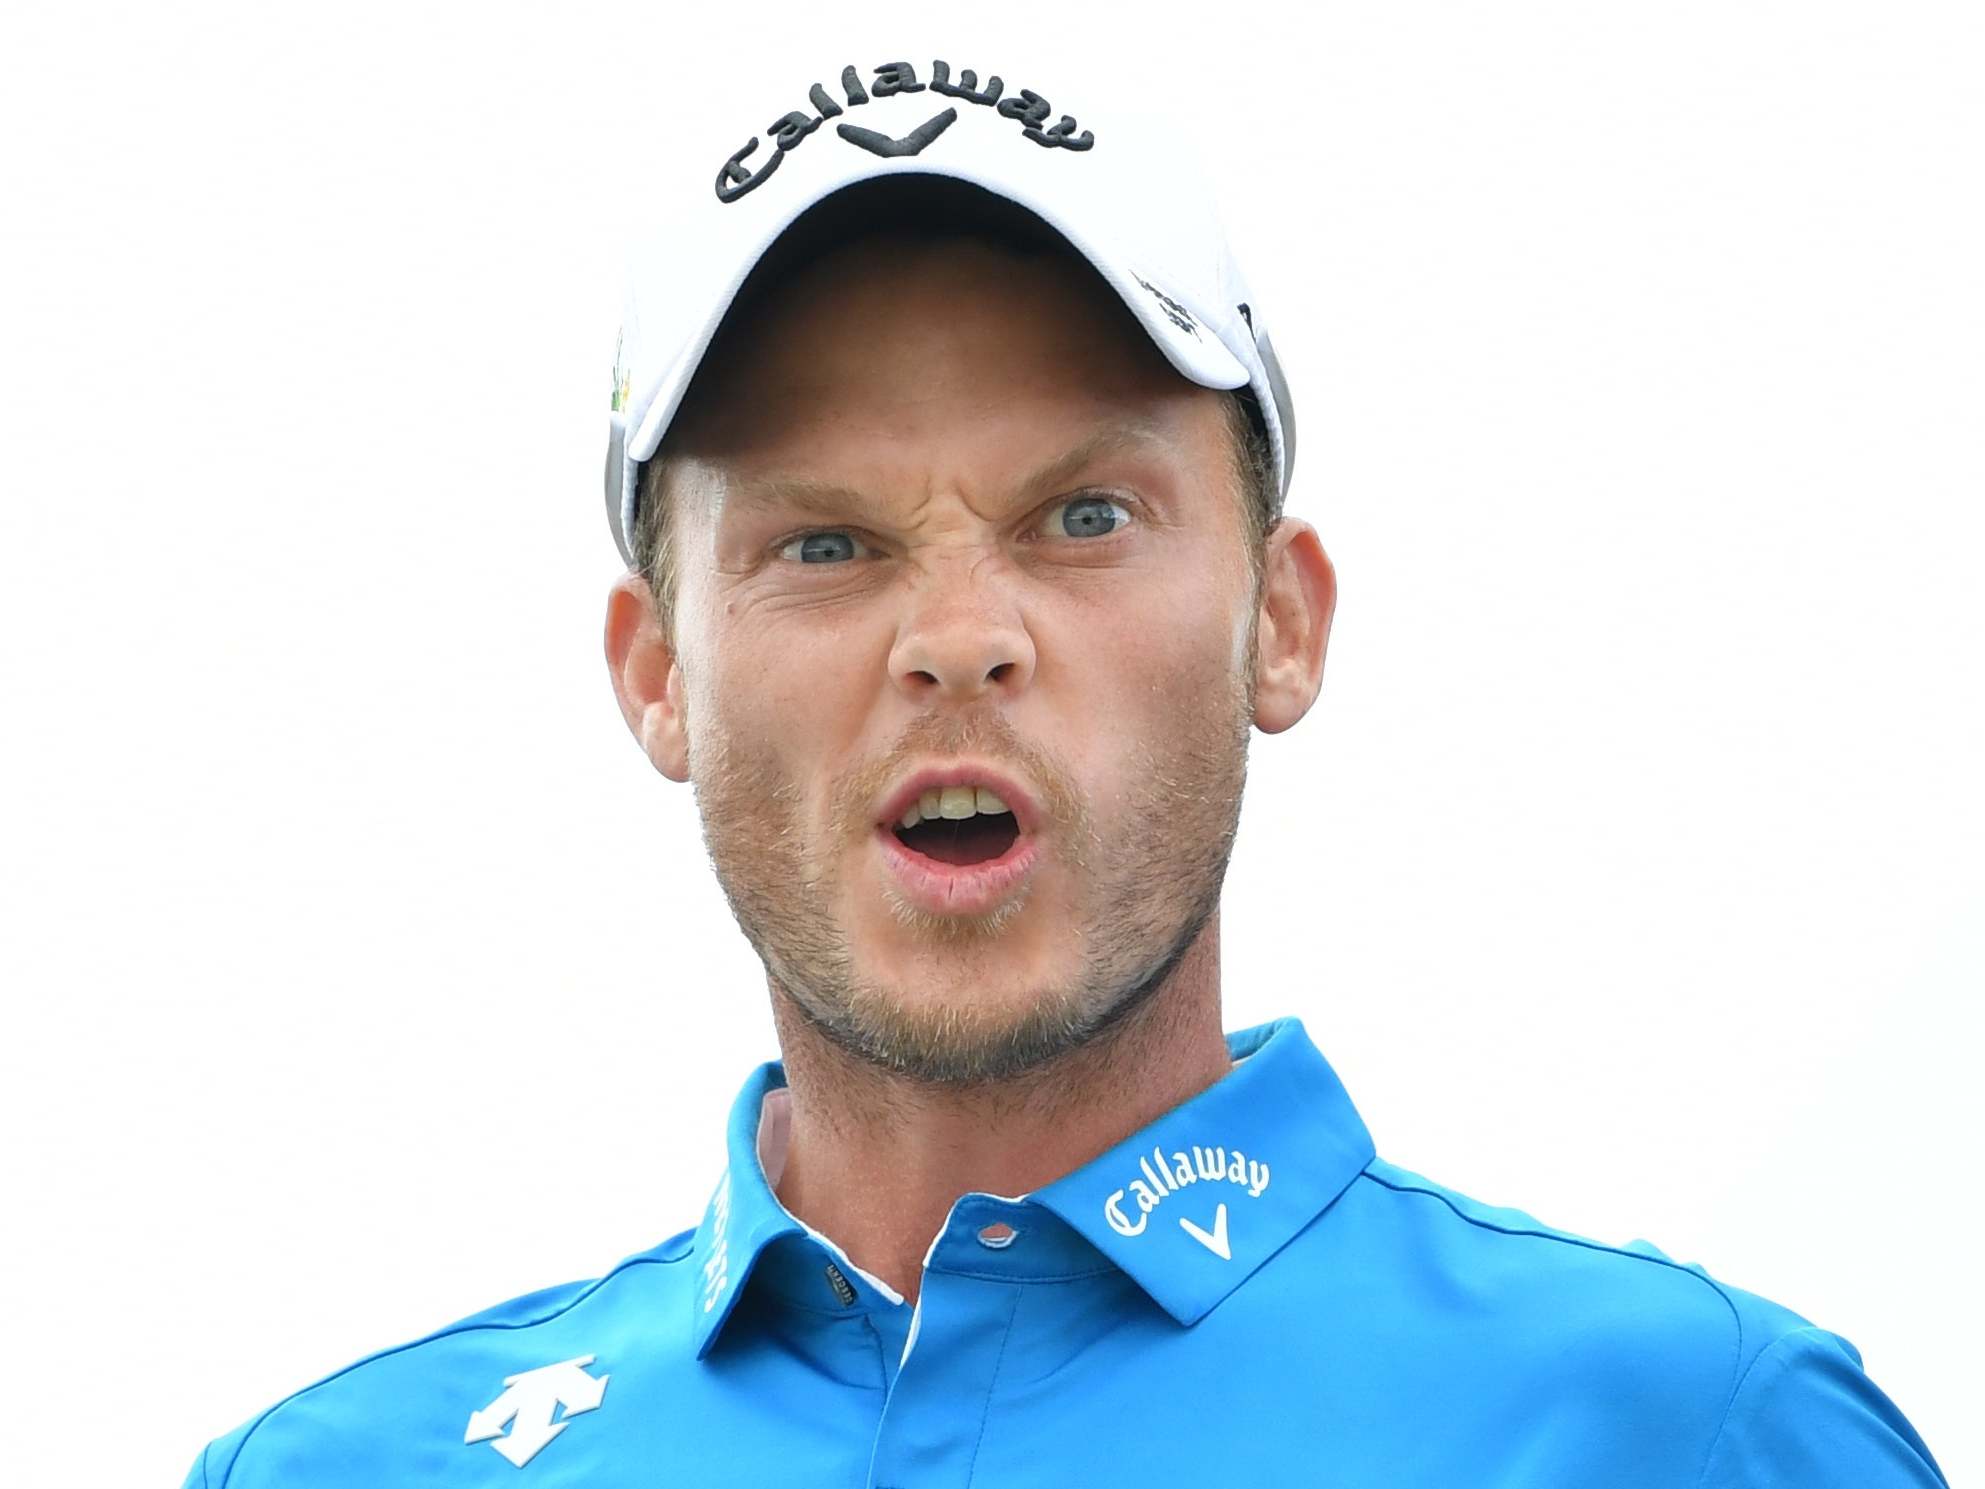 Willett reacts to his missed putt on 18 for the Portrush Open course record